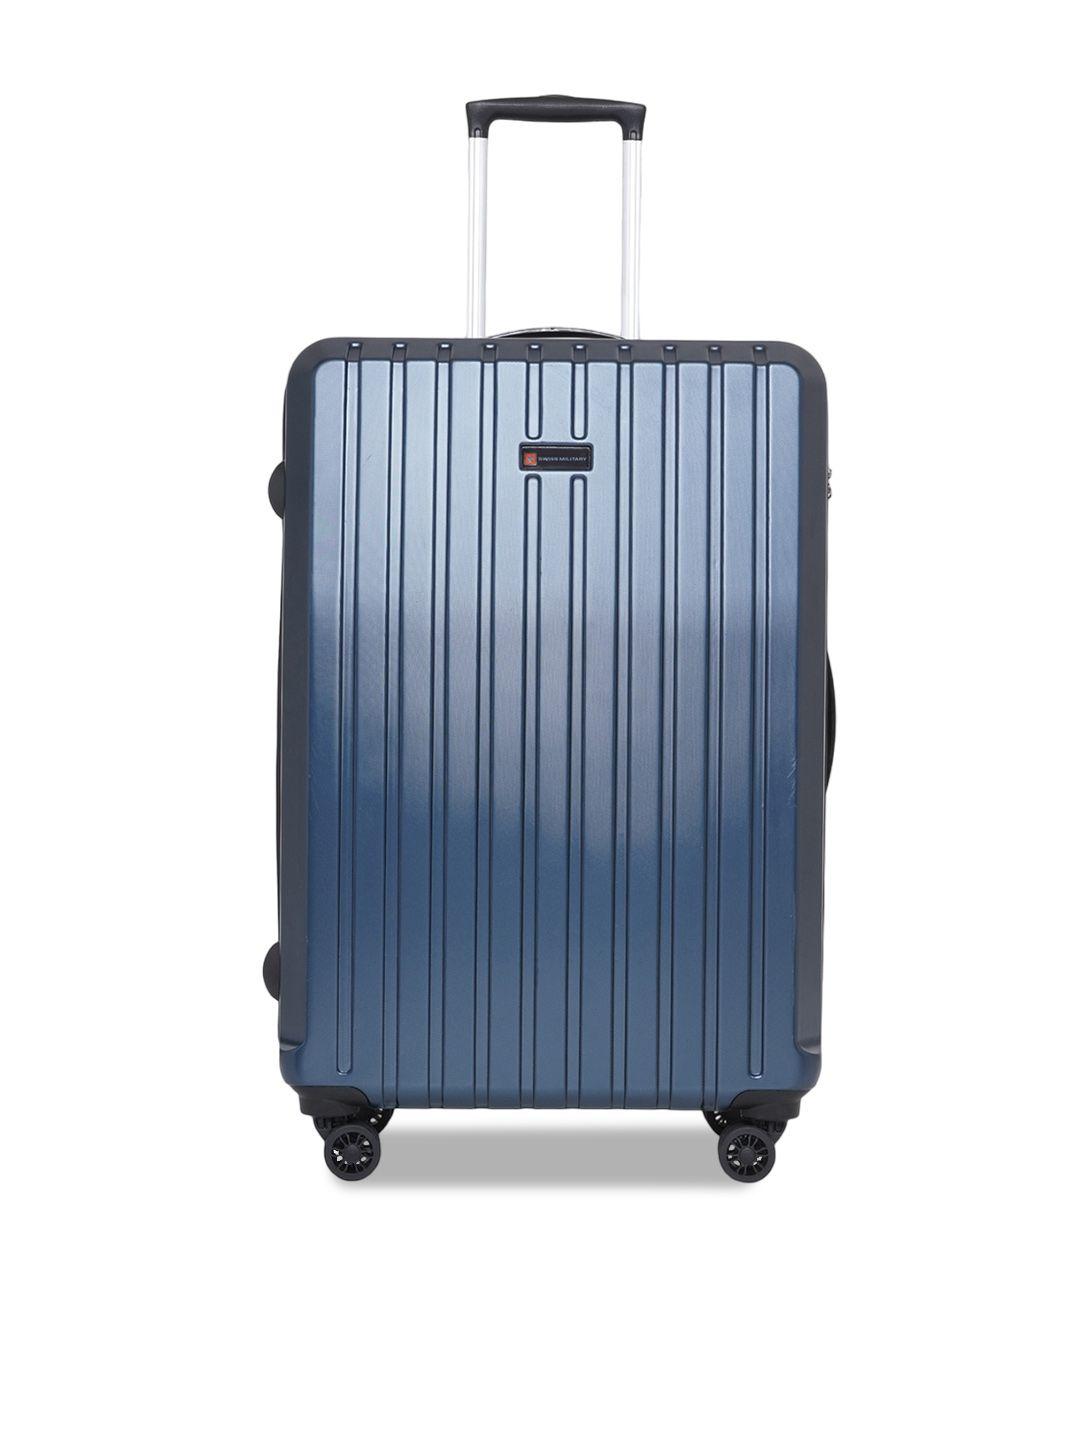 swiss military textured hard-sided medium trolley suitcase